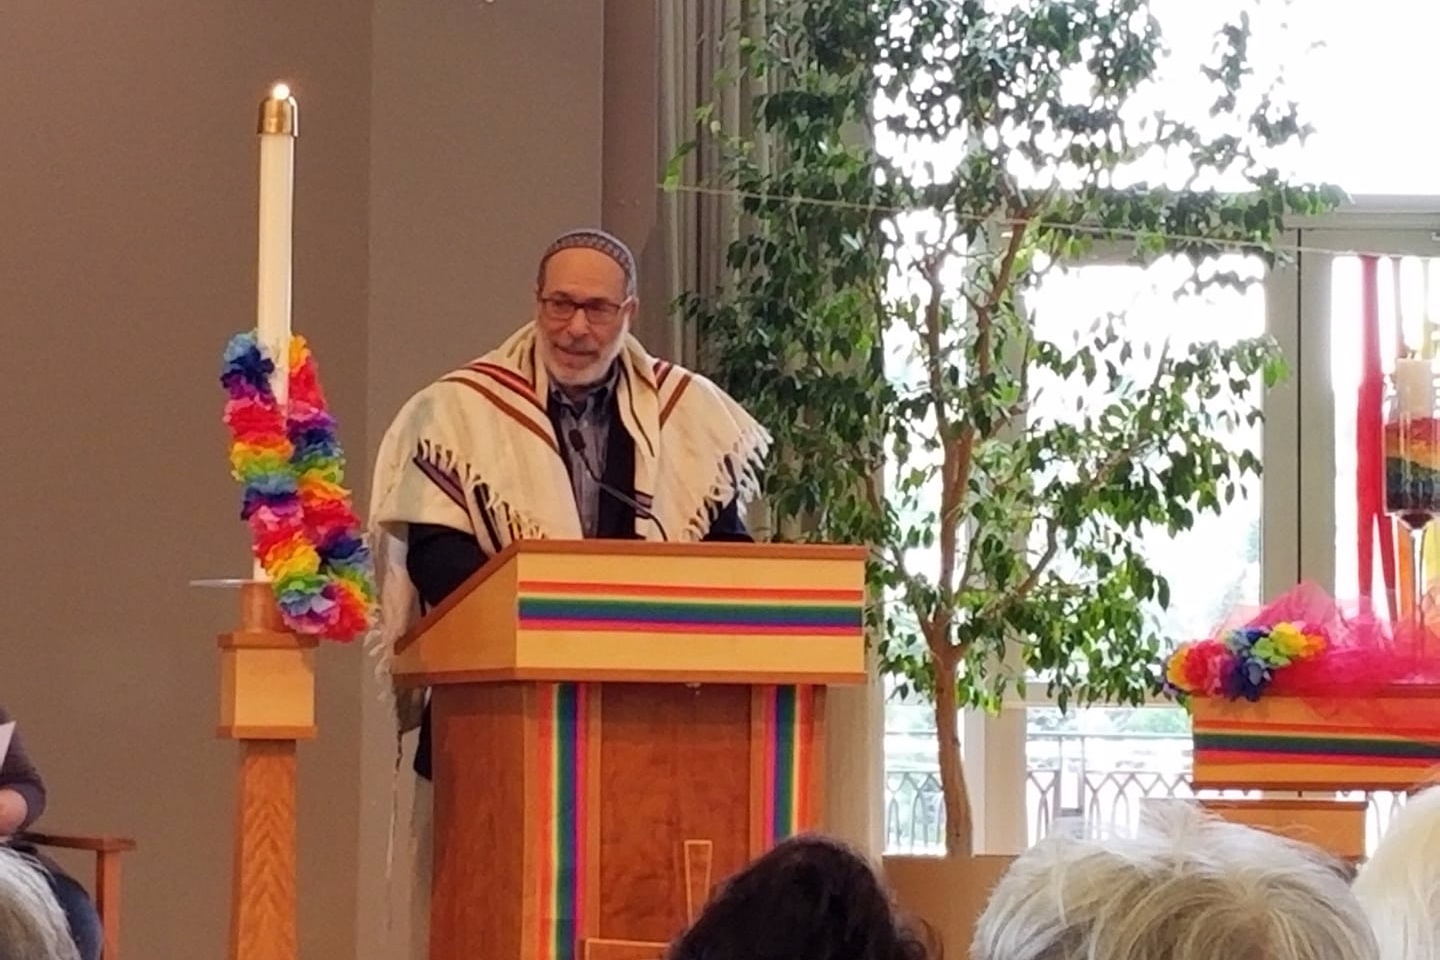 Delivering a blessing at the 2019 Pride service in Helena.